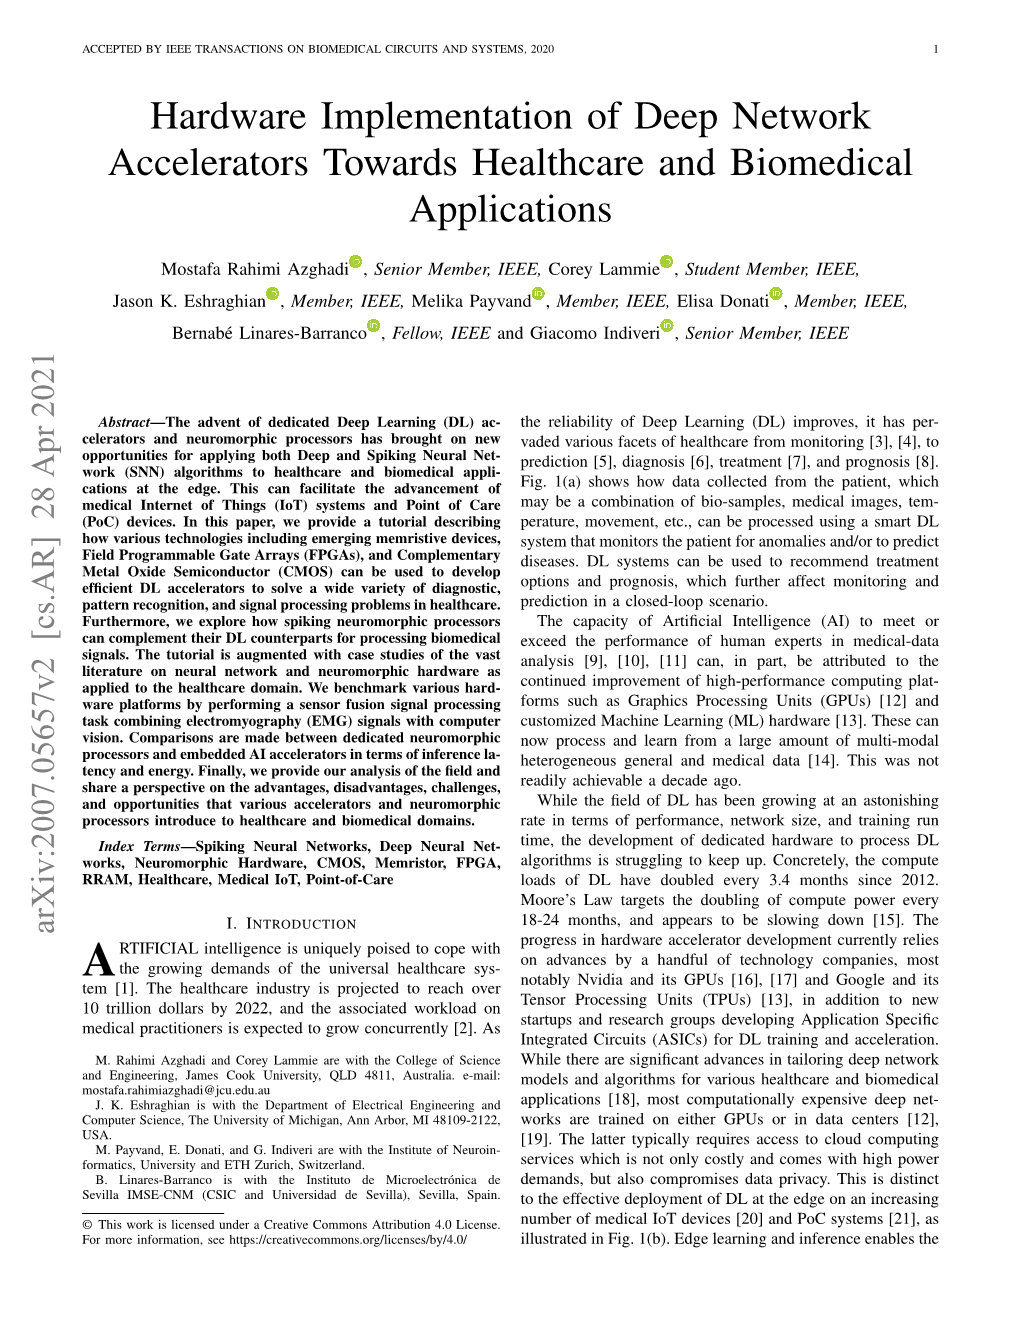 Hardware Implementation of Deep Network Accelerators Towards Healthcare and Biomedical Applications